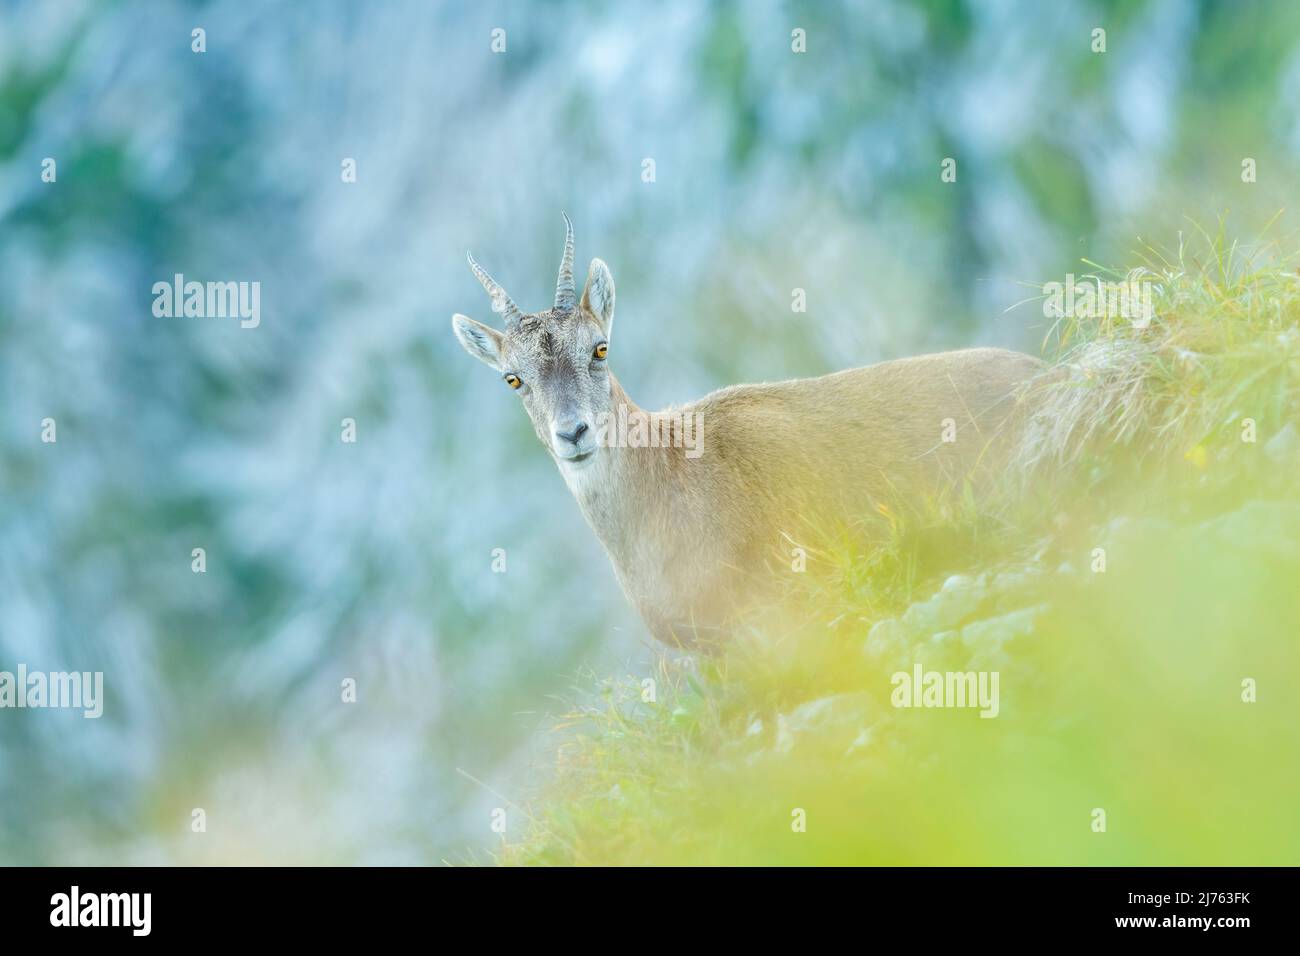 A young ibex looks into the camera, due to low shooting position, the foreground blurs. Stock Photo